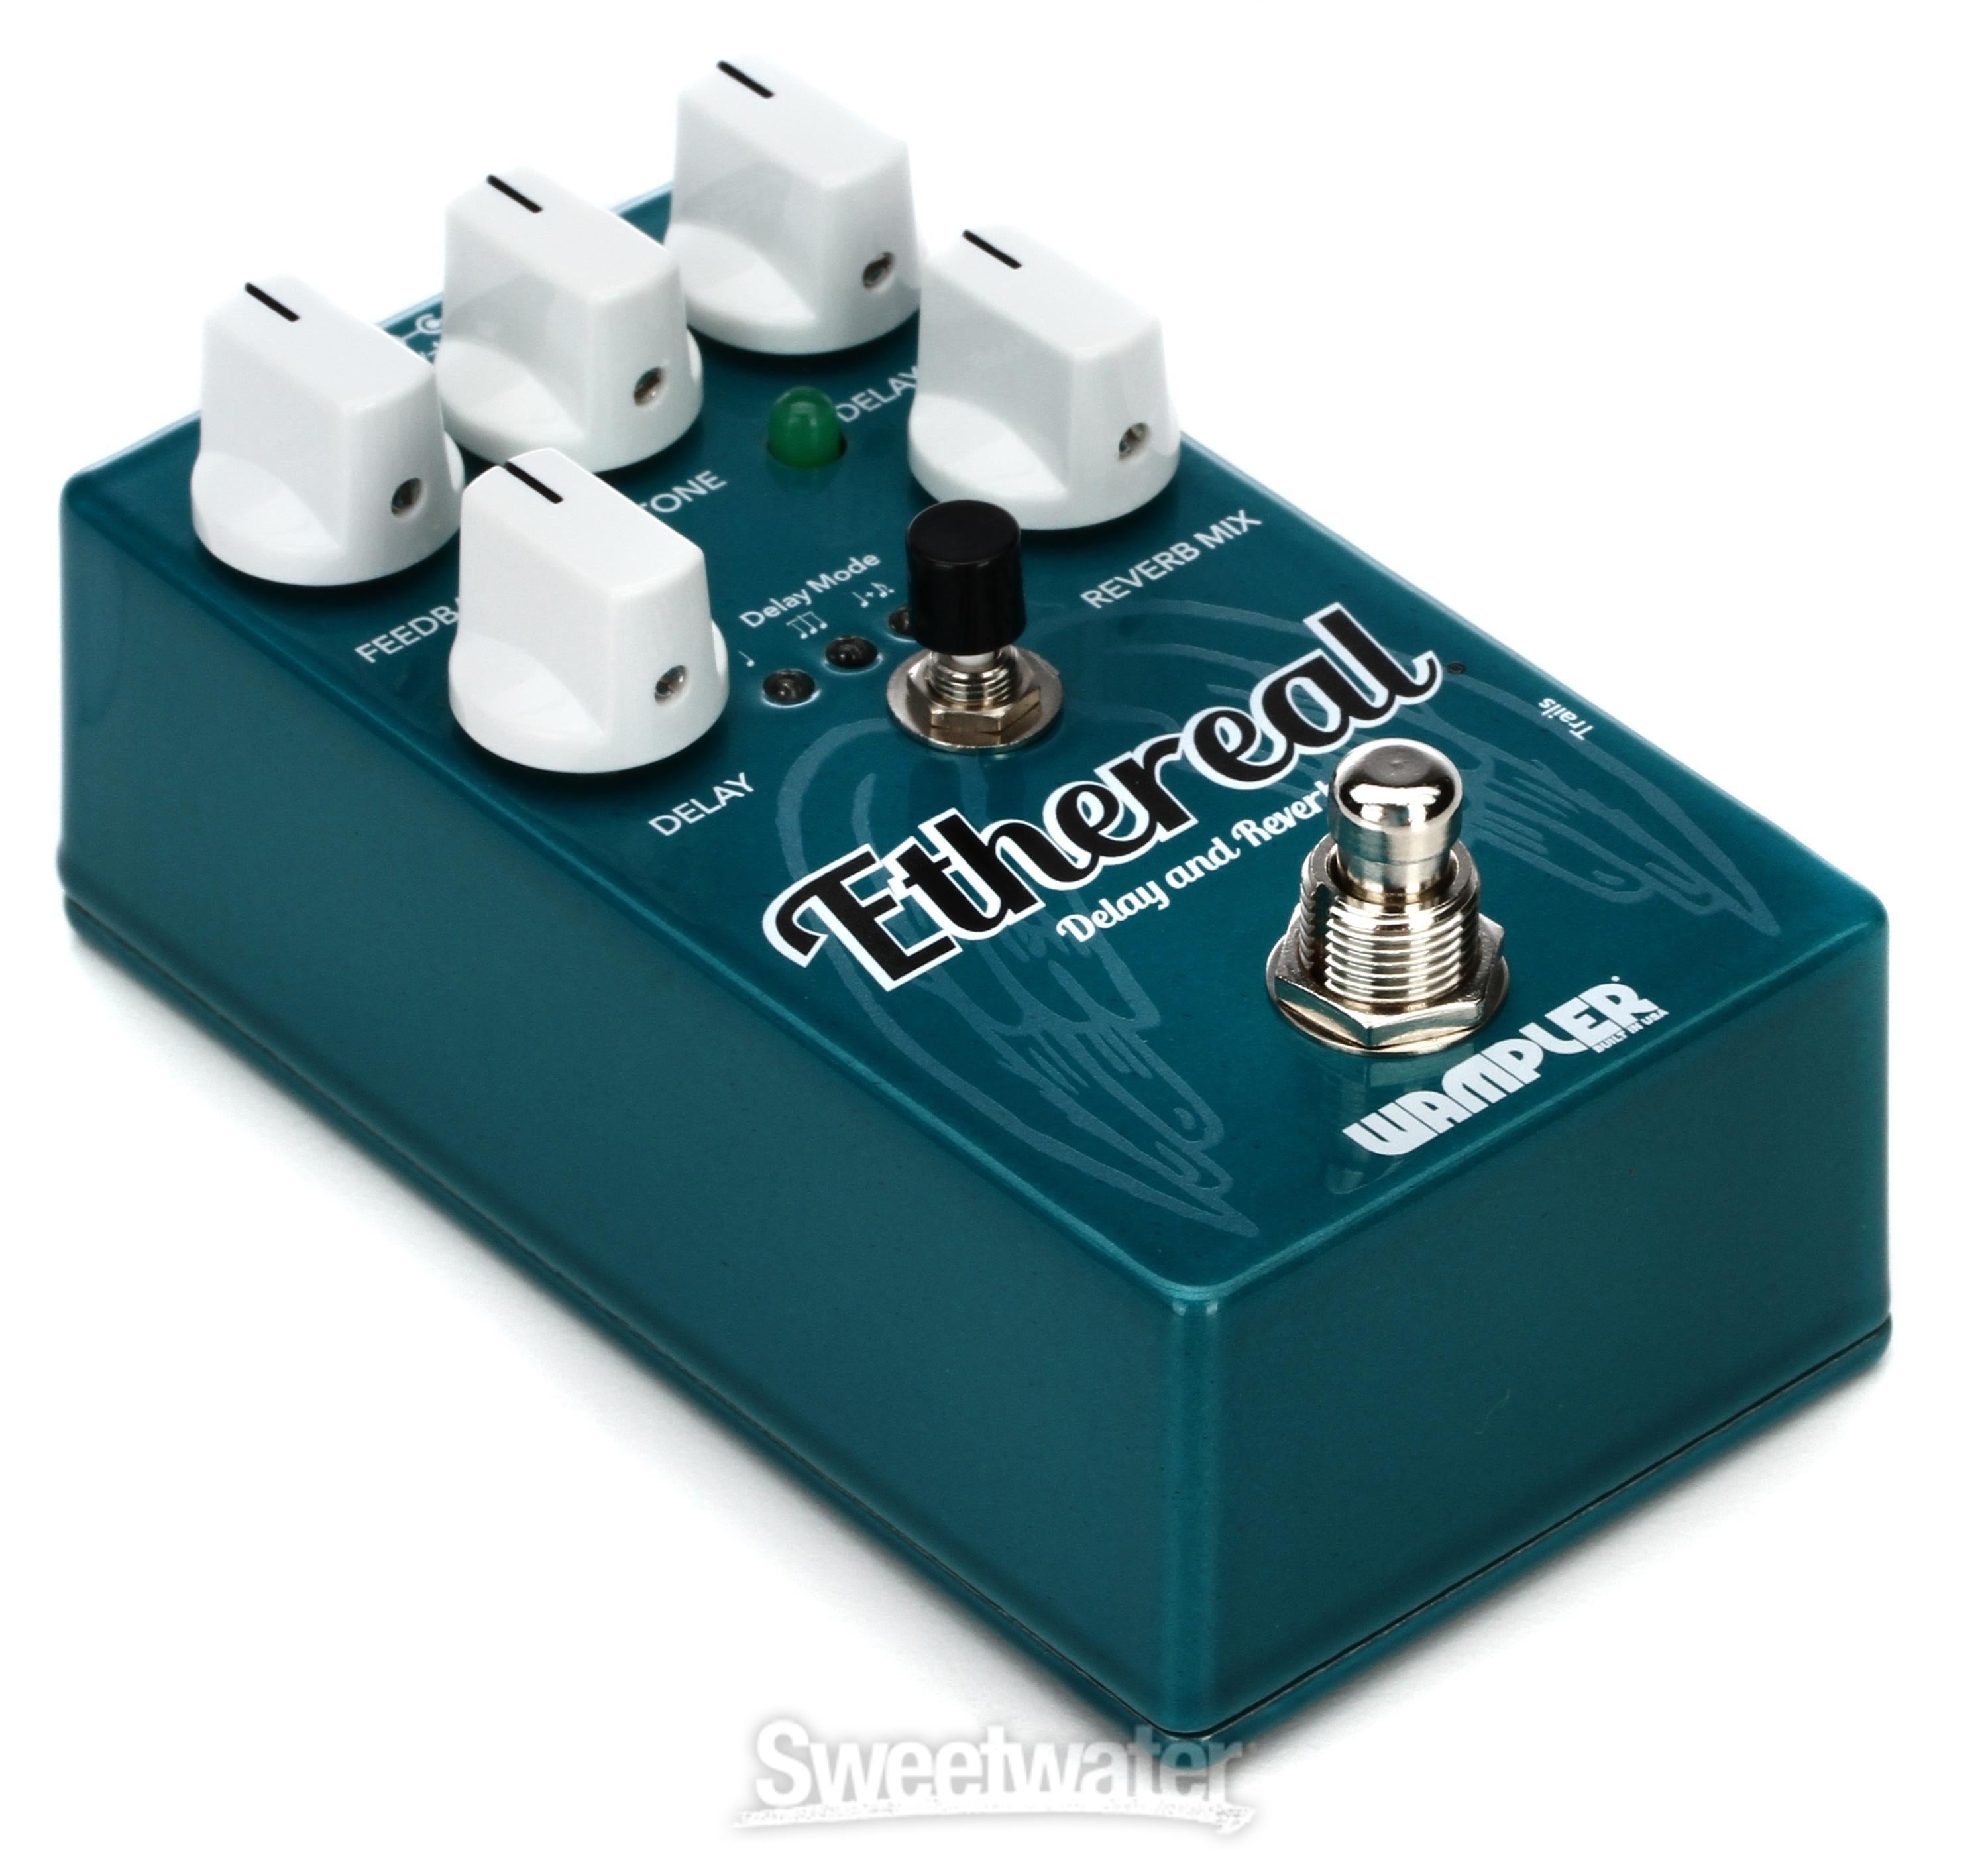 Wampler Ethereal Delay and Reverb Pedal | Sweetwater